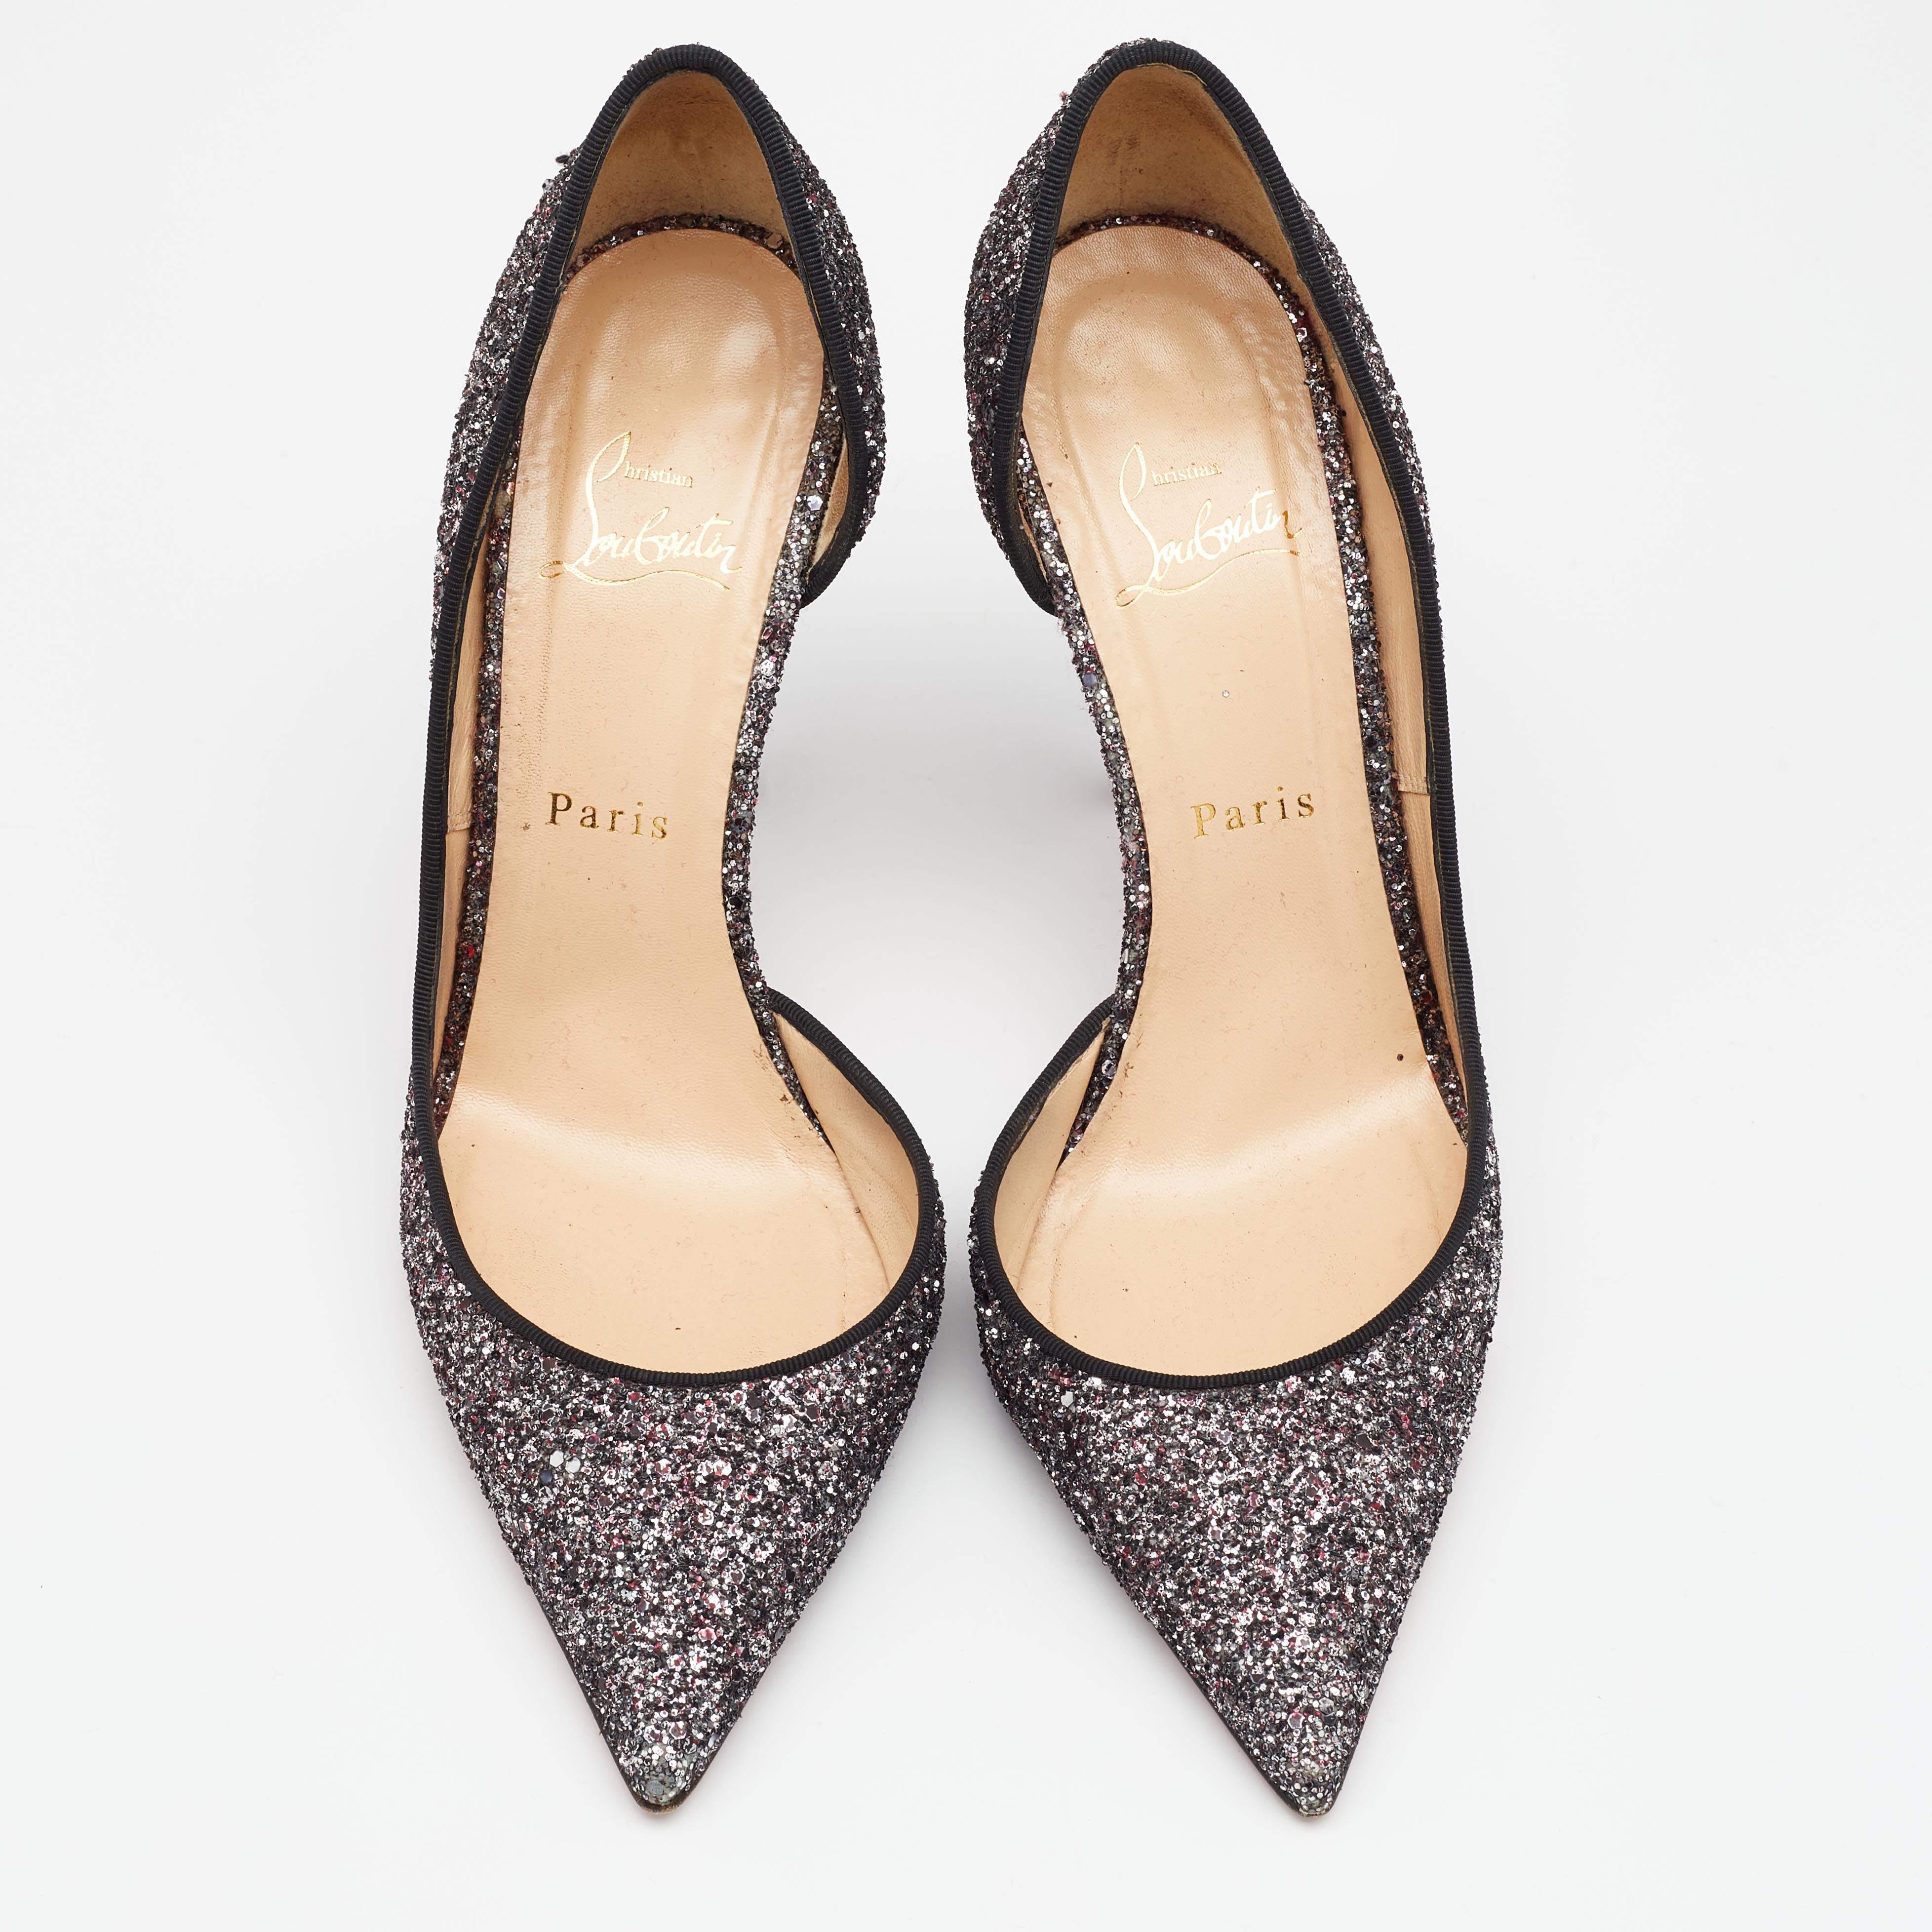 Christian Louboutin remains unmatched in terms of creating high-quality and amazing designer footwear, just like these Iriza D'orsay pumps. They have been created using black glitter and feature pointed-toes and slim heels. Truly beautiful in style